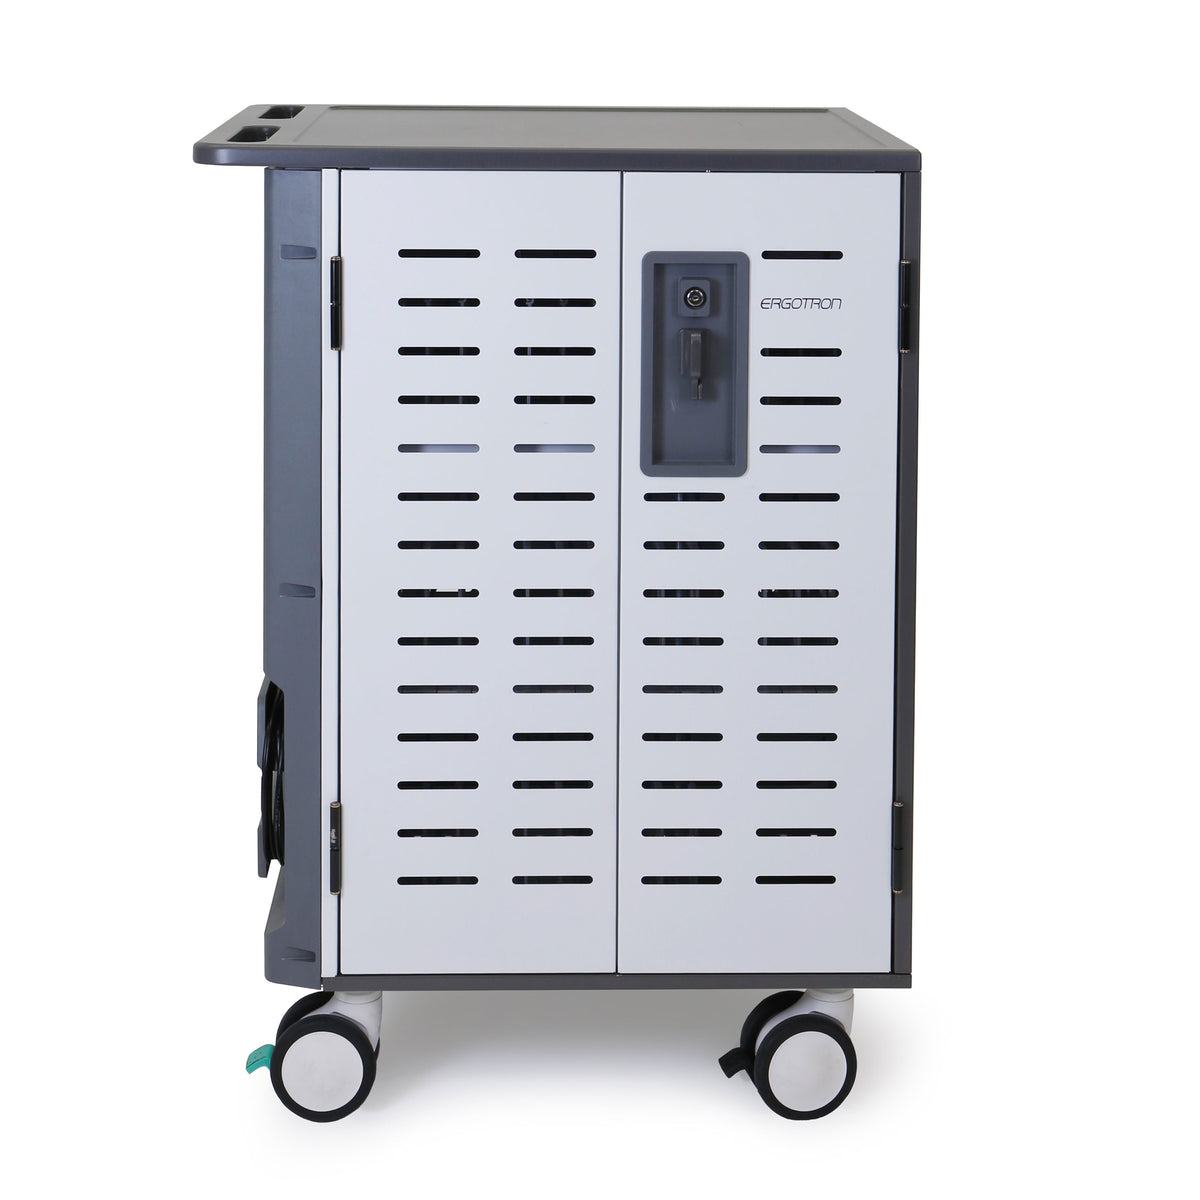 Ergotron Zip40 - Charging and management cart - for 40 tablets / notebooks - lockable - steel - gray, white - screen size: up to 15.6"